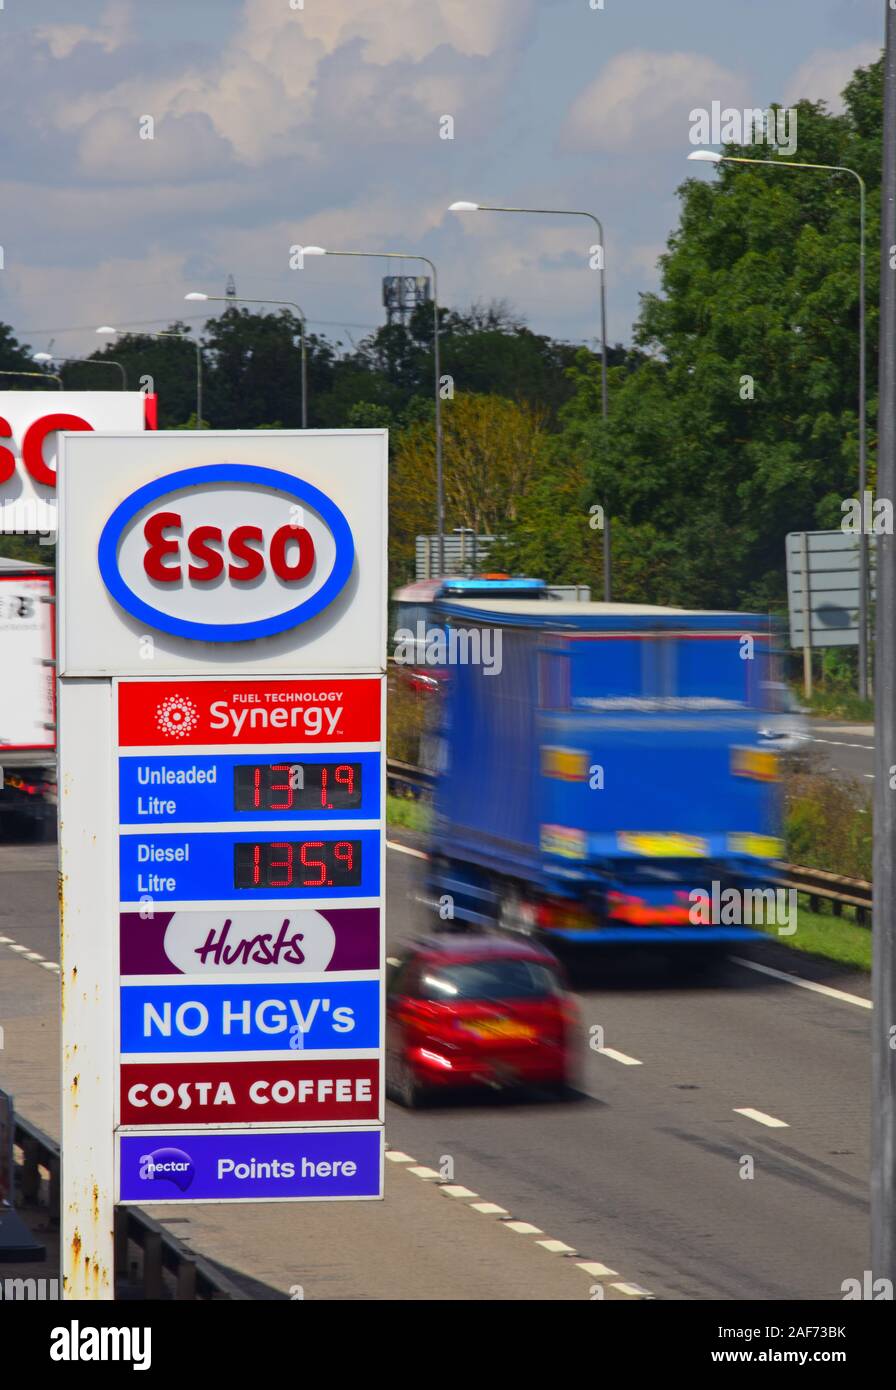 traffic passing esso garage forecourt by the A1/M motorway skellow yorkshire united kingdom Stock Photo